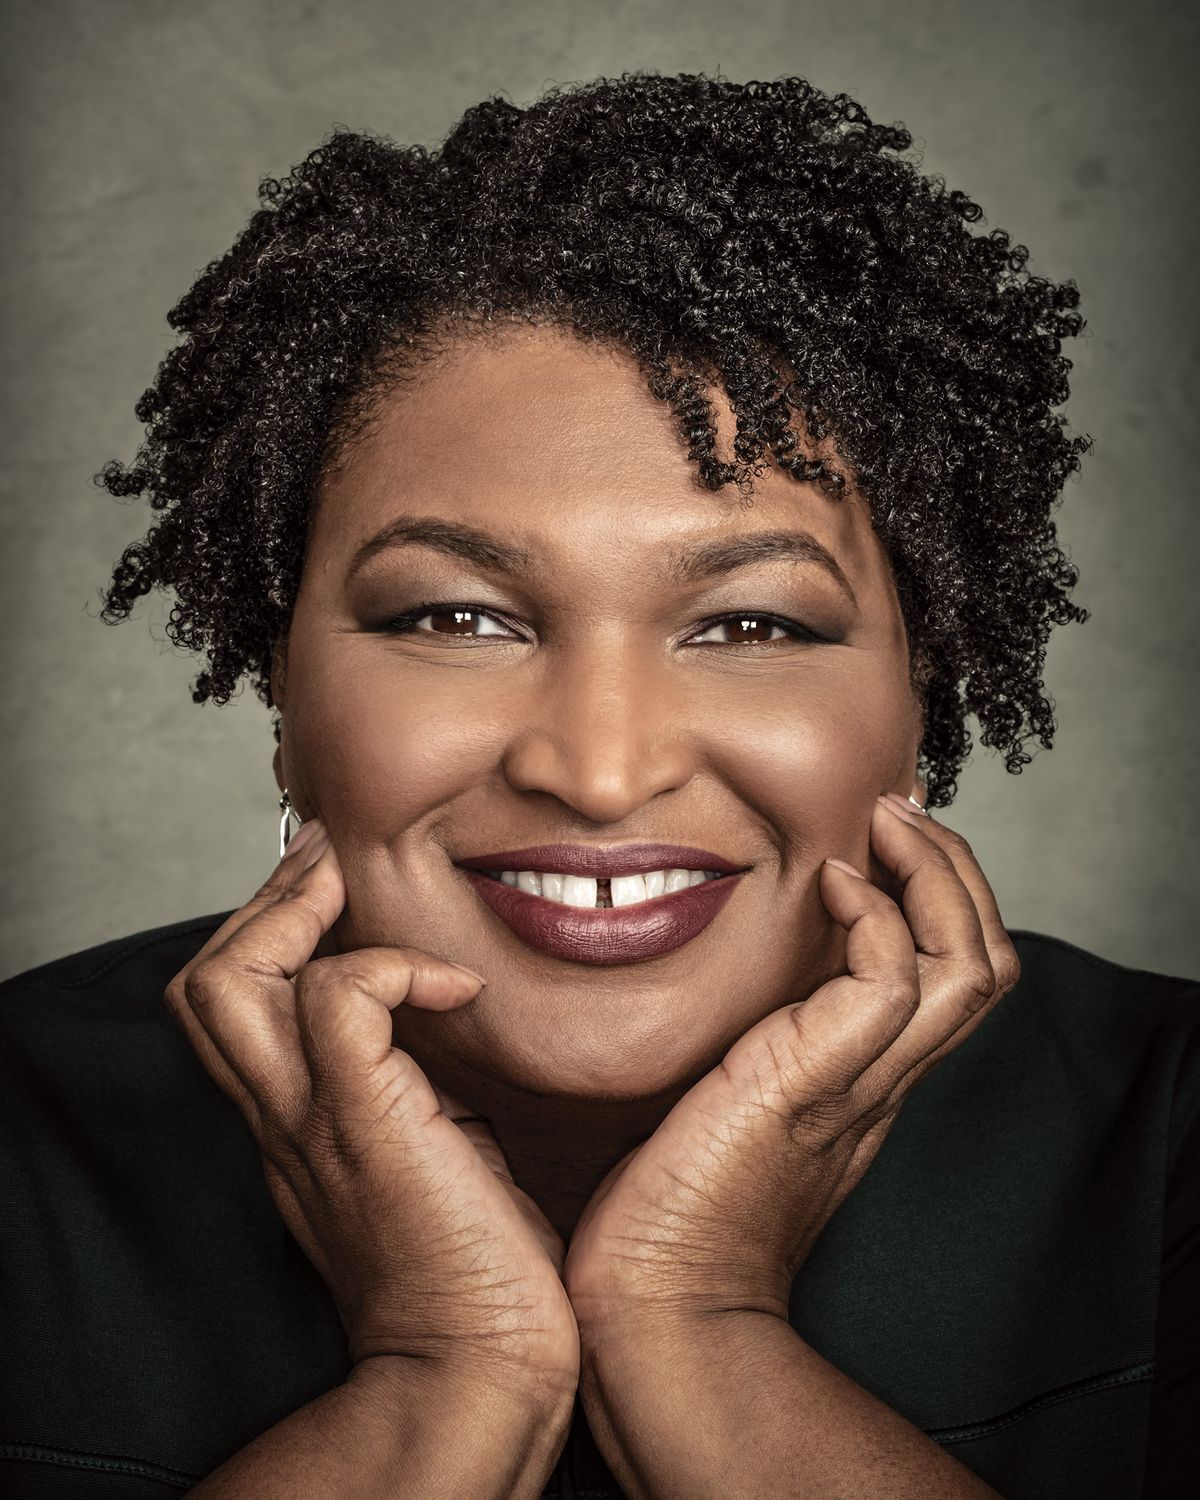 Stacey Abrams Romance Novels Will Re-debut